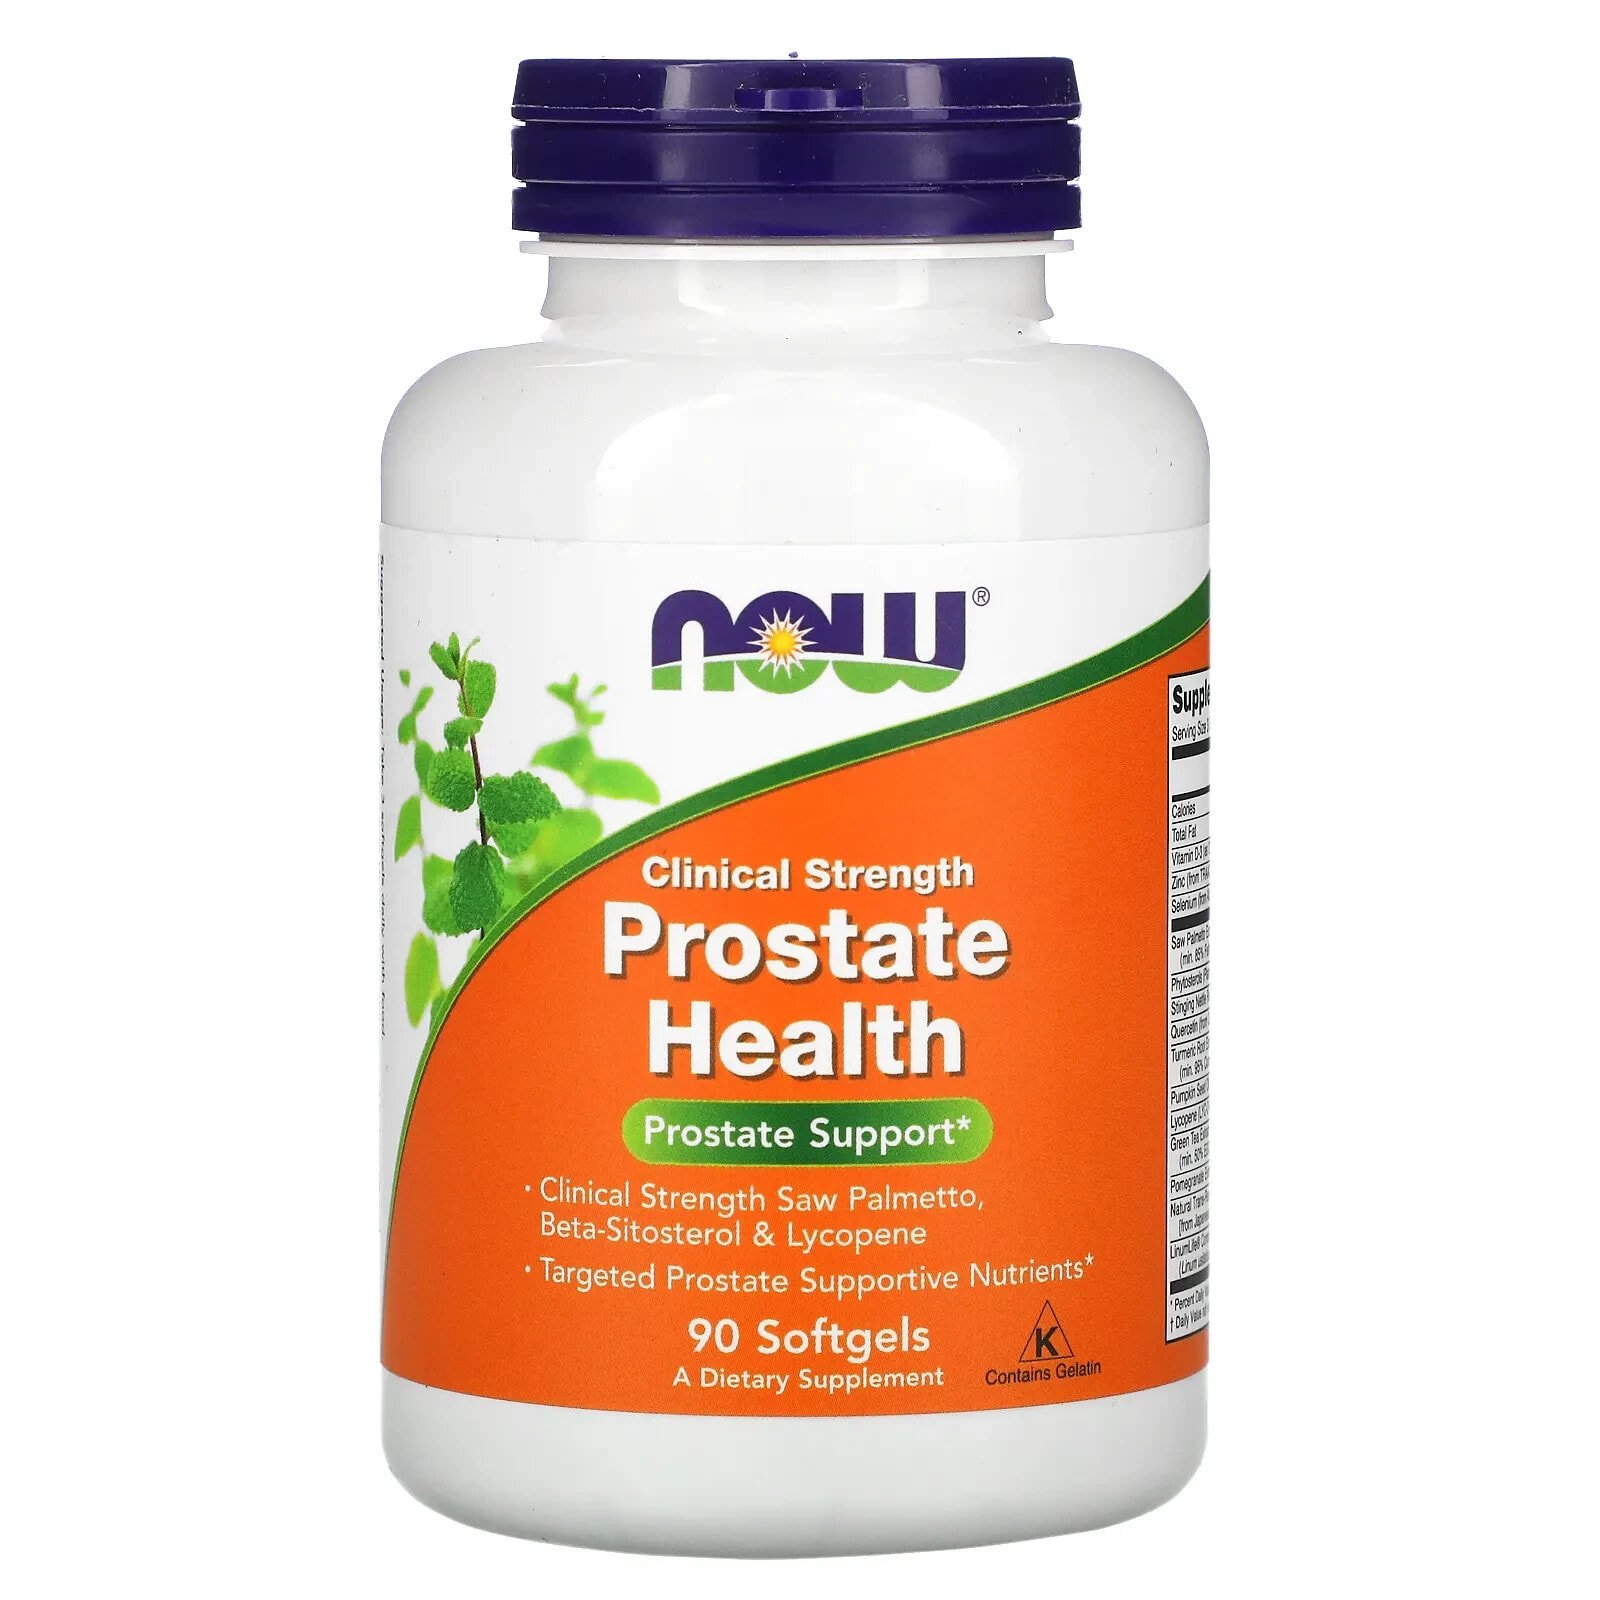 Clinical Strength Prostate Health, 180 Softgels